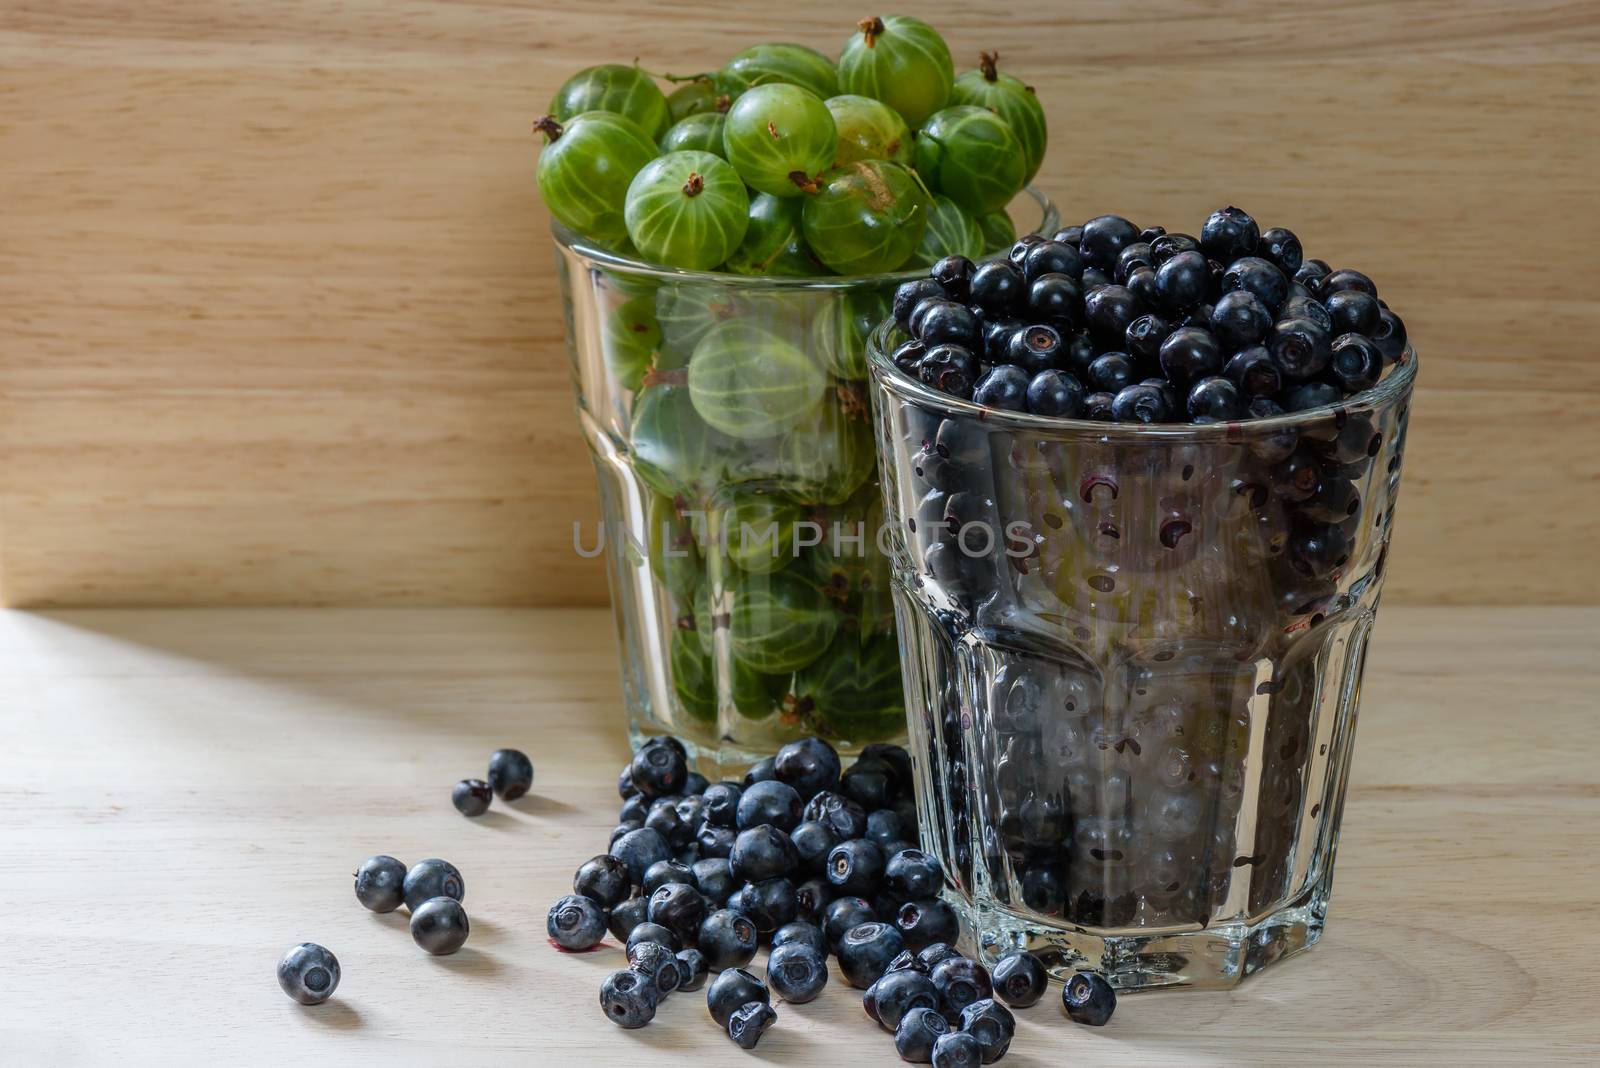 Blueberries and gooseberries in a glass with scattered berries. Good addition for breakfast